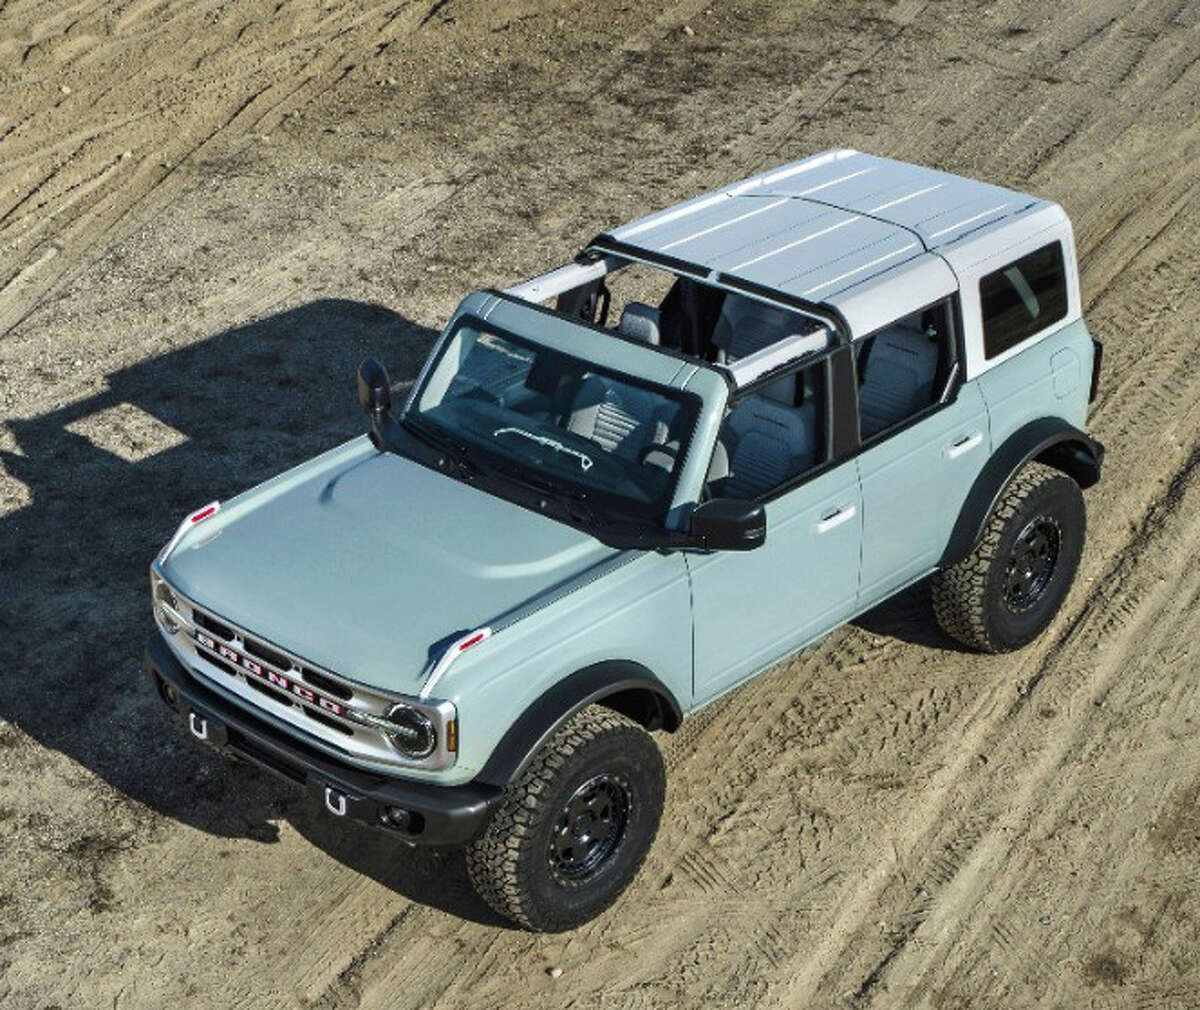 The 2022 Ford Bronco comes in two- or four-door versions, and four-wheel drive is standard.